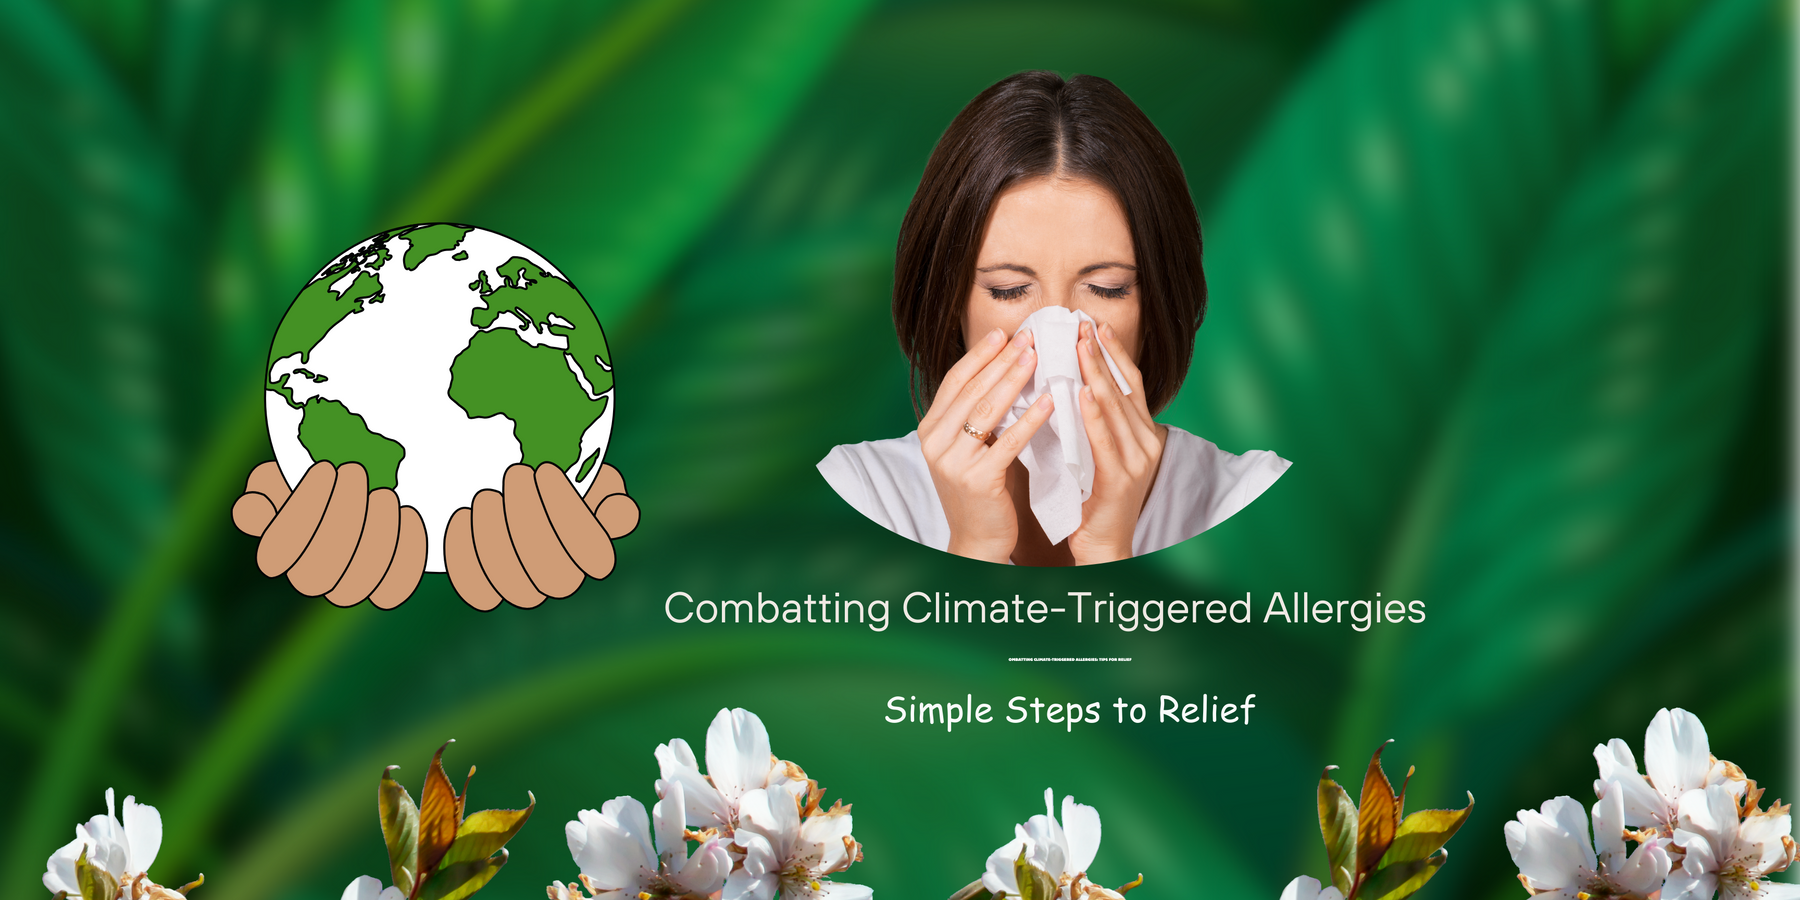 Earth Day Special: How Is Climate Change Worsening Your Allergies? What Protective Measures Are There?